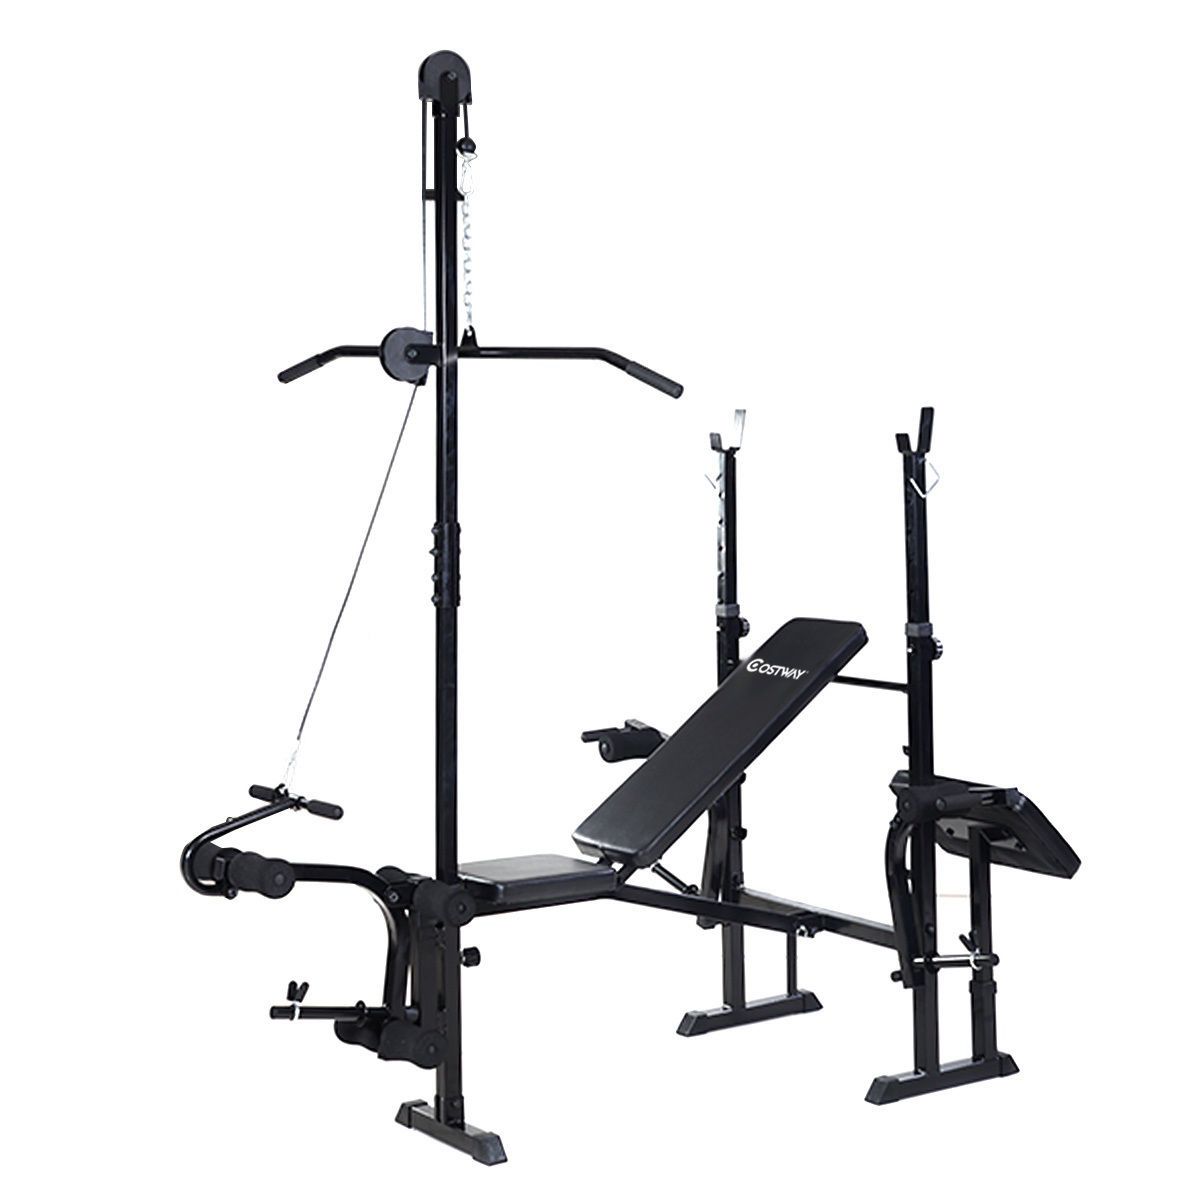 New Adjustable Weight Lifting Flat Bench Rack Set Fitness Exercise Body Workout